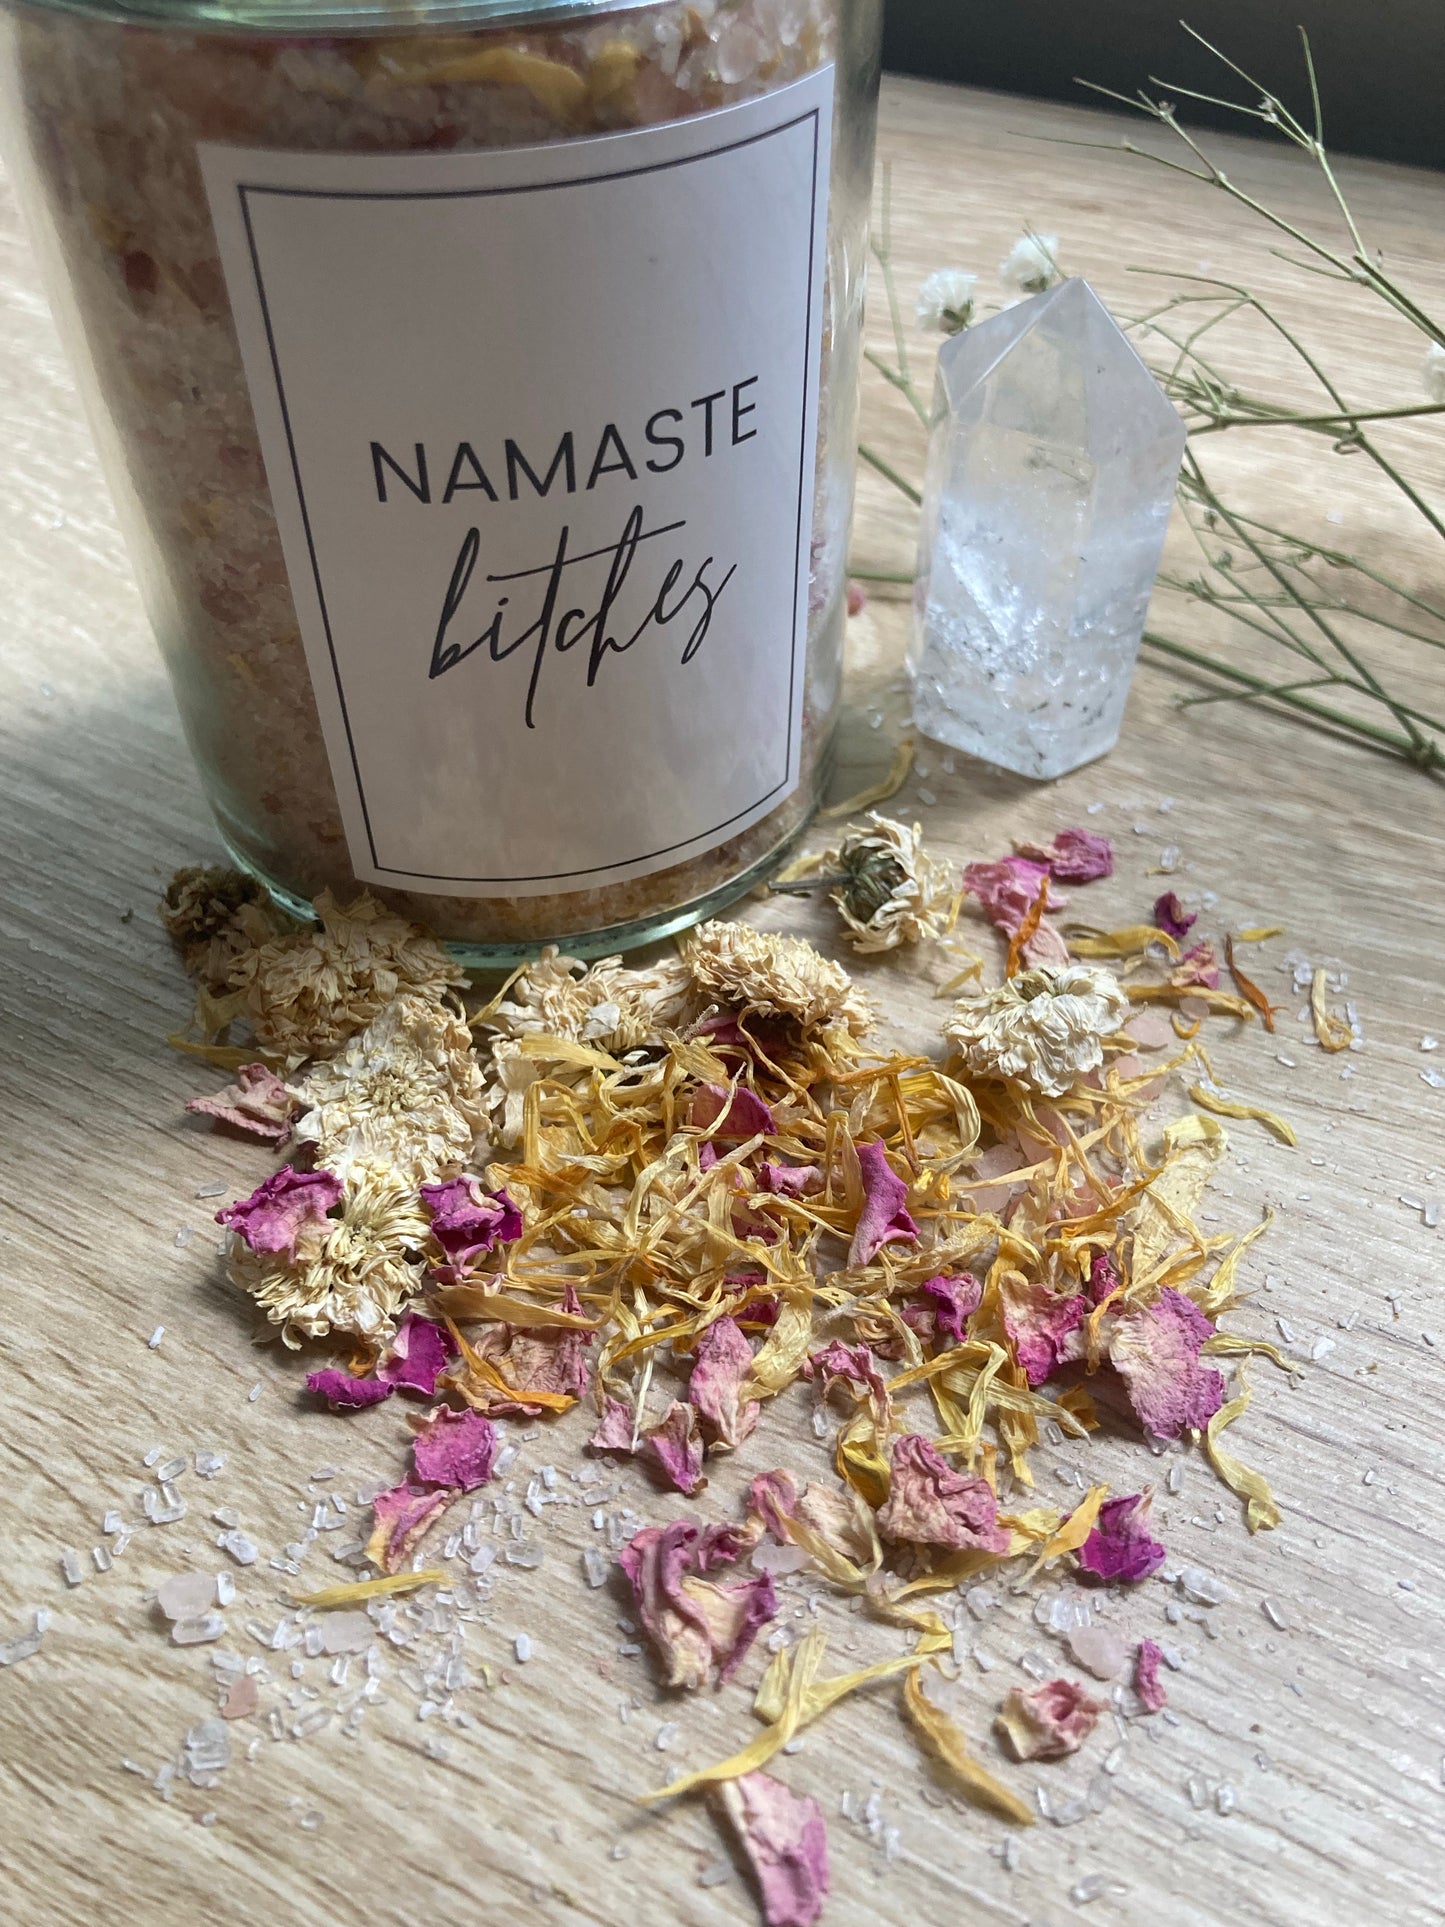 Namaste Bitches - The Sassy & Salty Collection